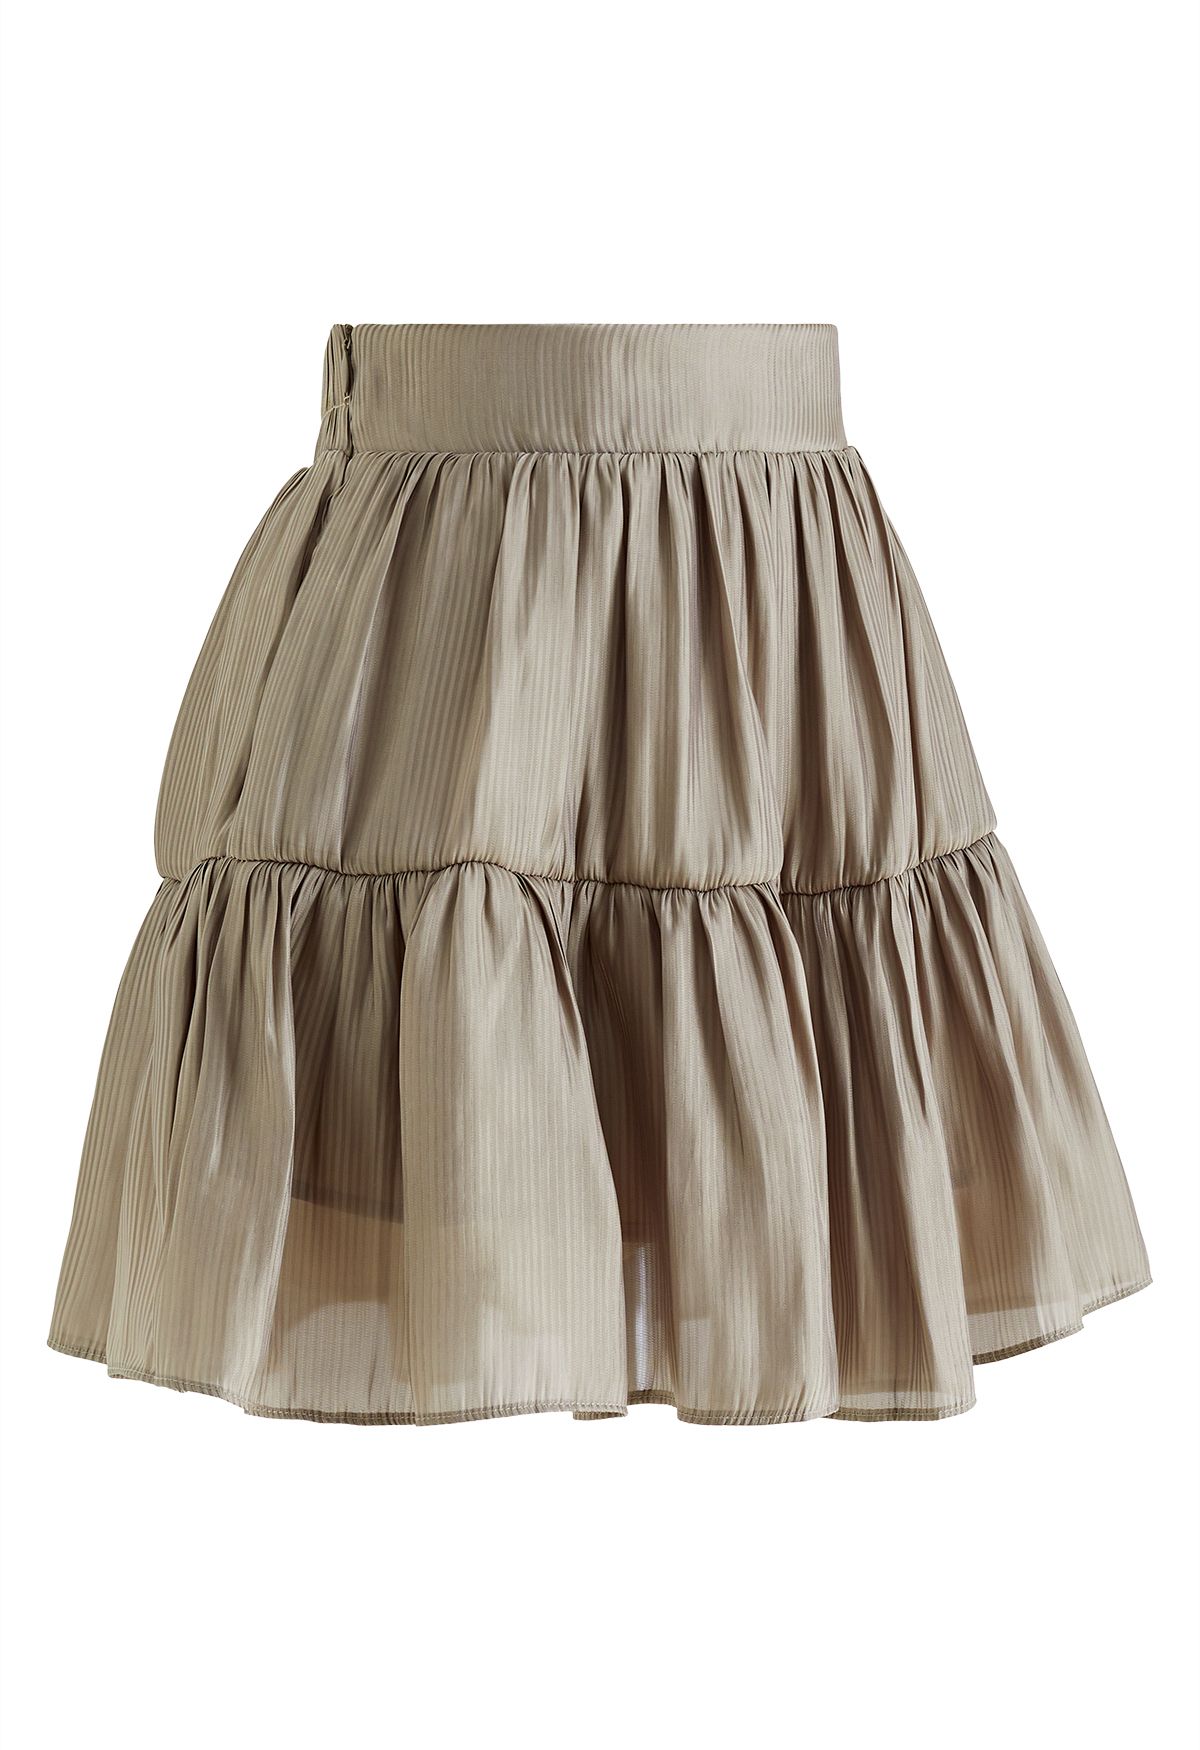 Glimmer Ruched Flare Mini Skirt in Olive